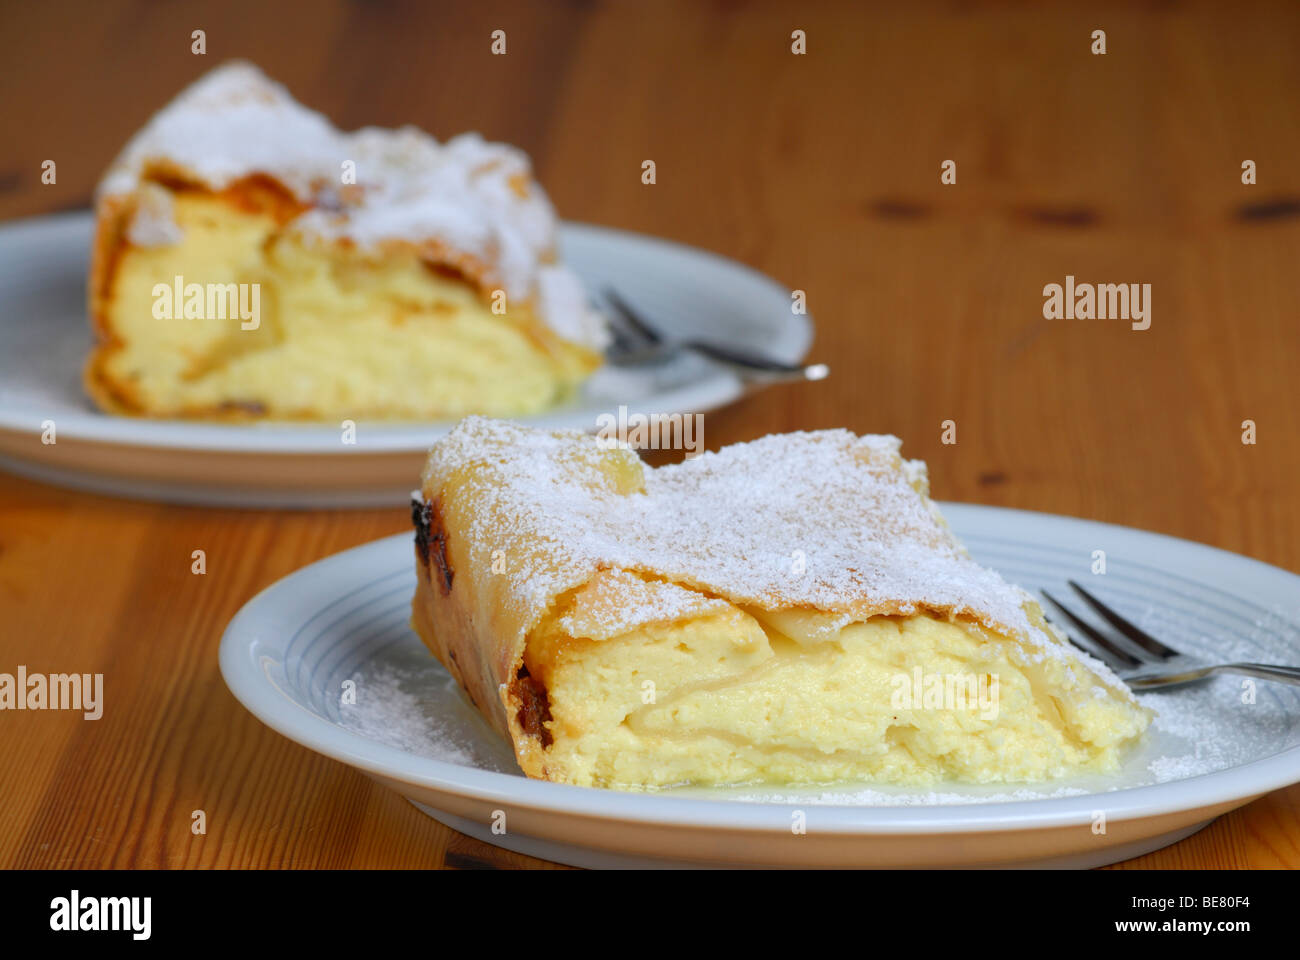 Two portions of quark strudel on plate and wooden table Stock Photo